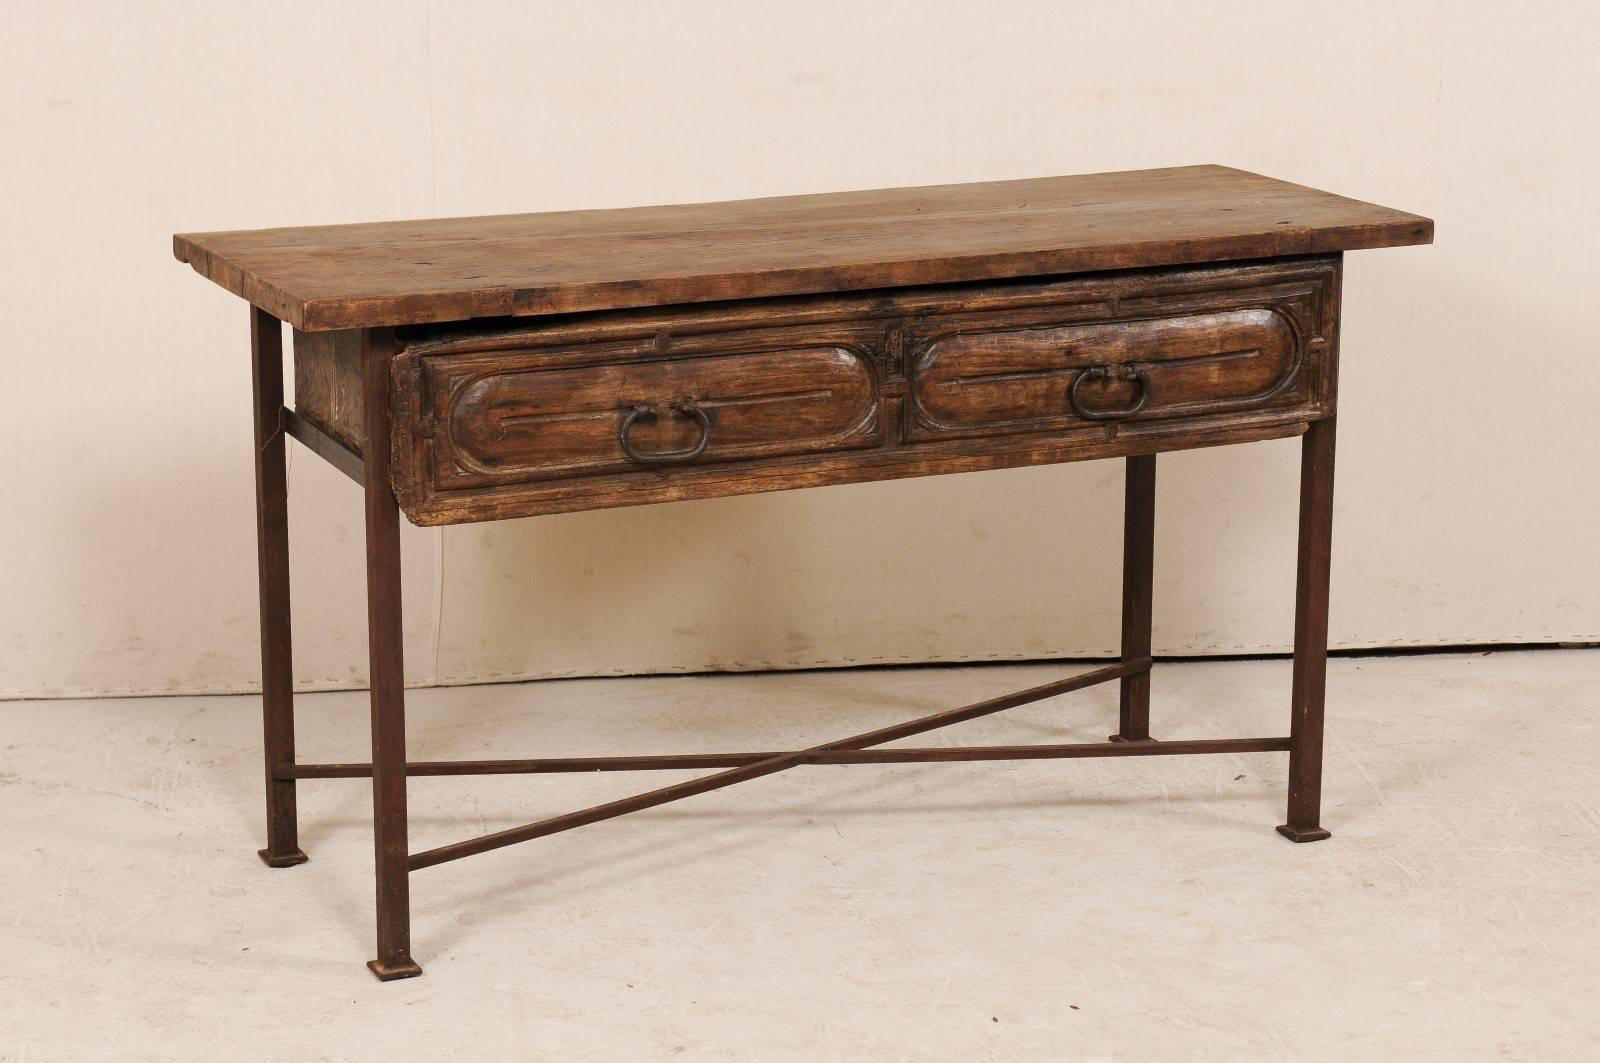 A custom table fashioned from an 18th century Spanish drawer. This unique table features an exquisite 18th century Spanish wood carved drawer with it's original forged iron hardware. The drawer has been set into a custom patinated iron base and an